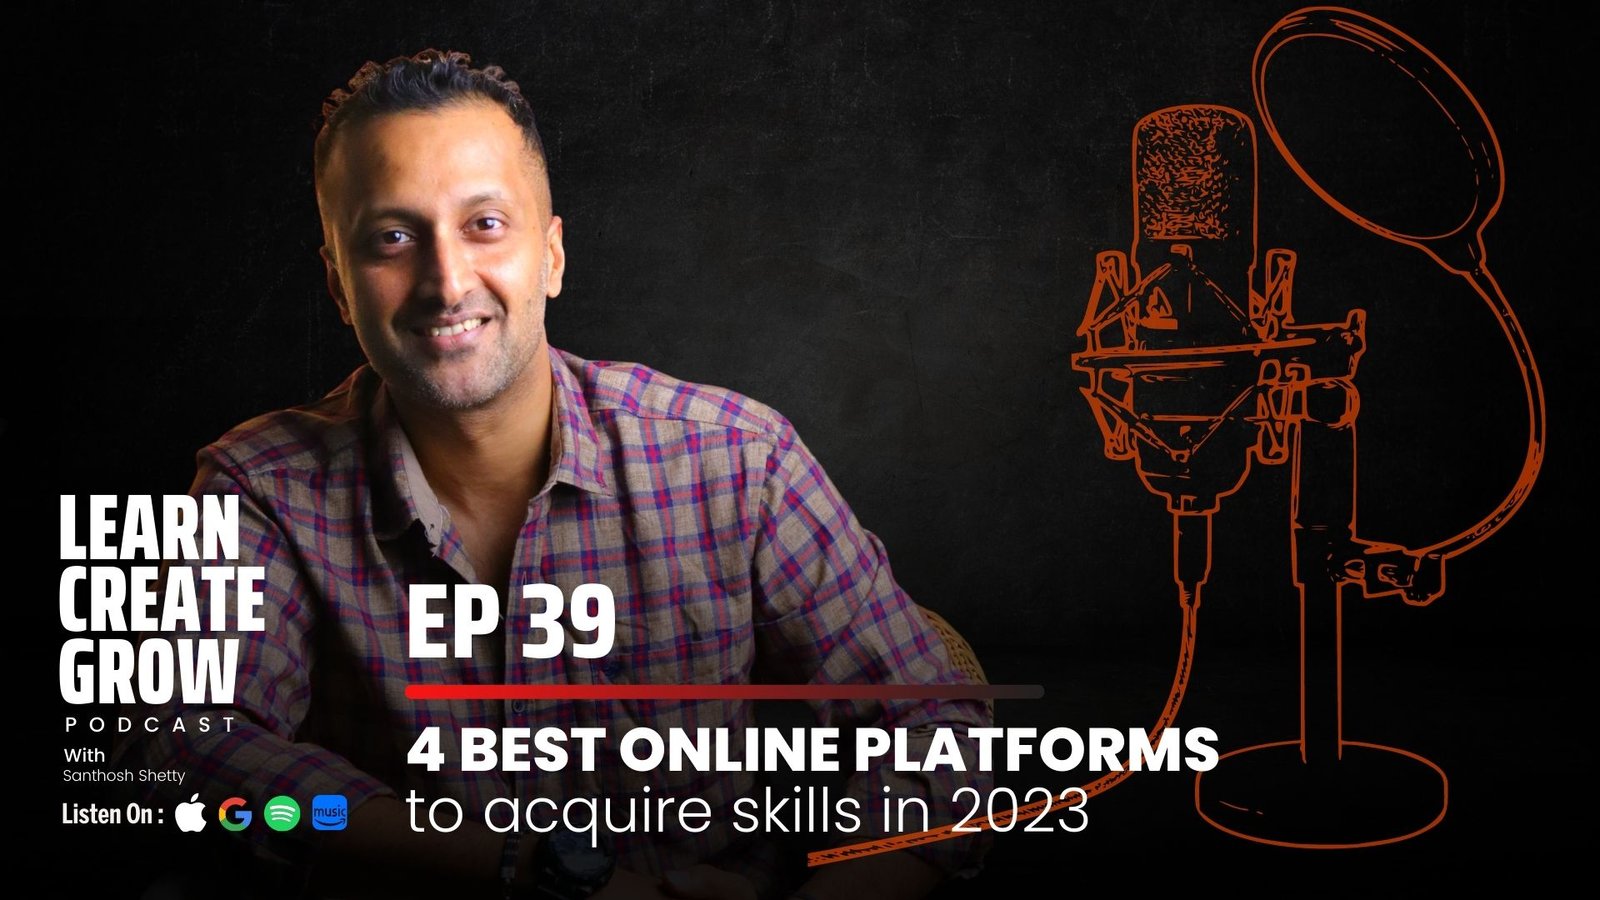 EP 39 - Learn Create Grow Podcast - Santhosh Shetty - 4 Best Online Platforms to acquire Skills in 2023 Feature image (2)